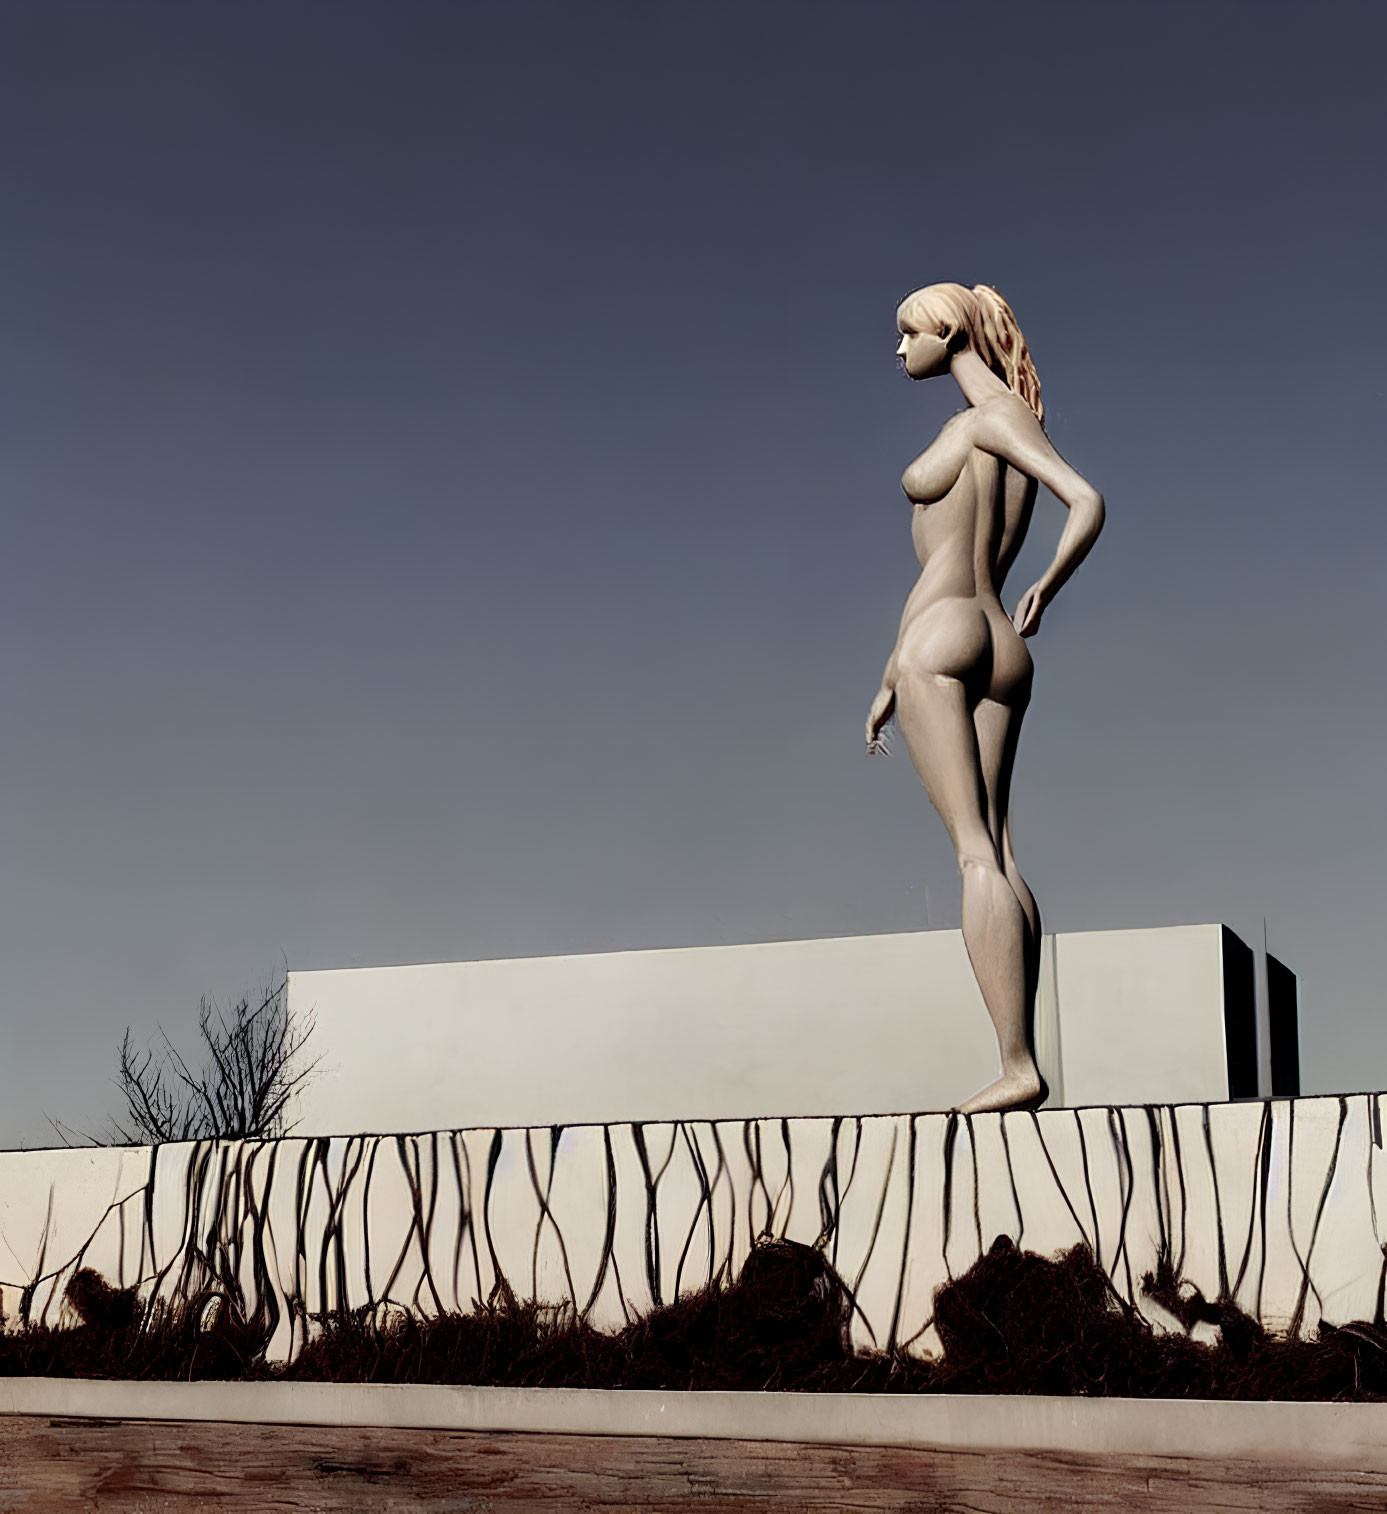 Slender female figure statue standing elegantly on wall with clear sky background